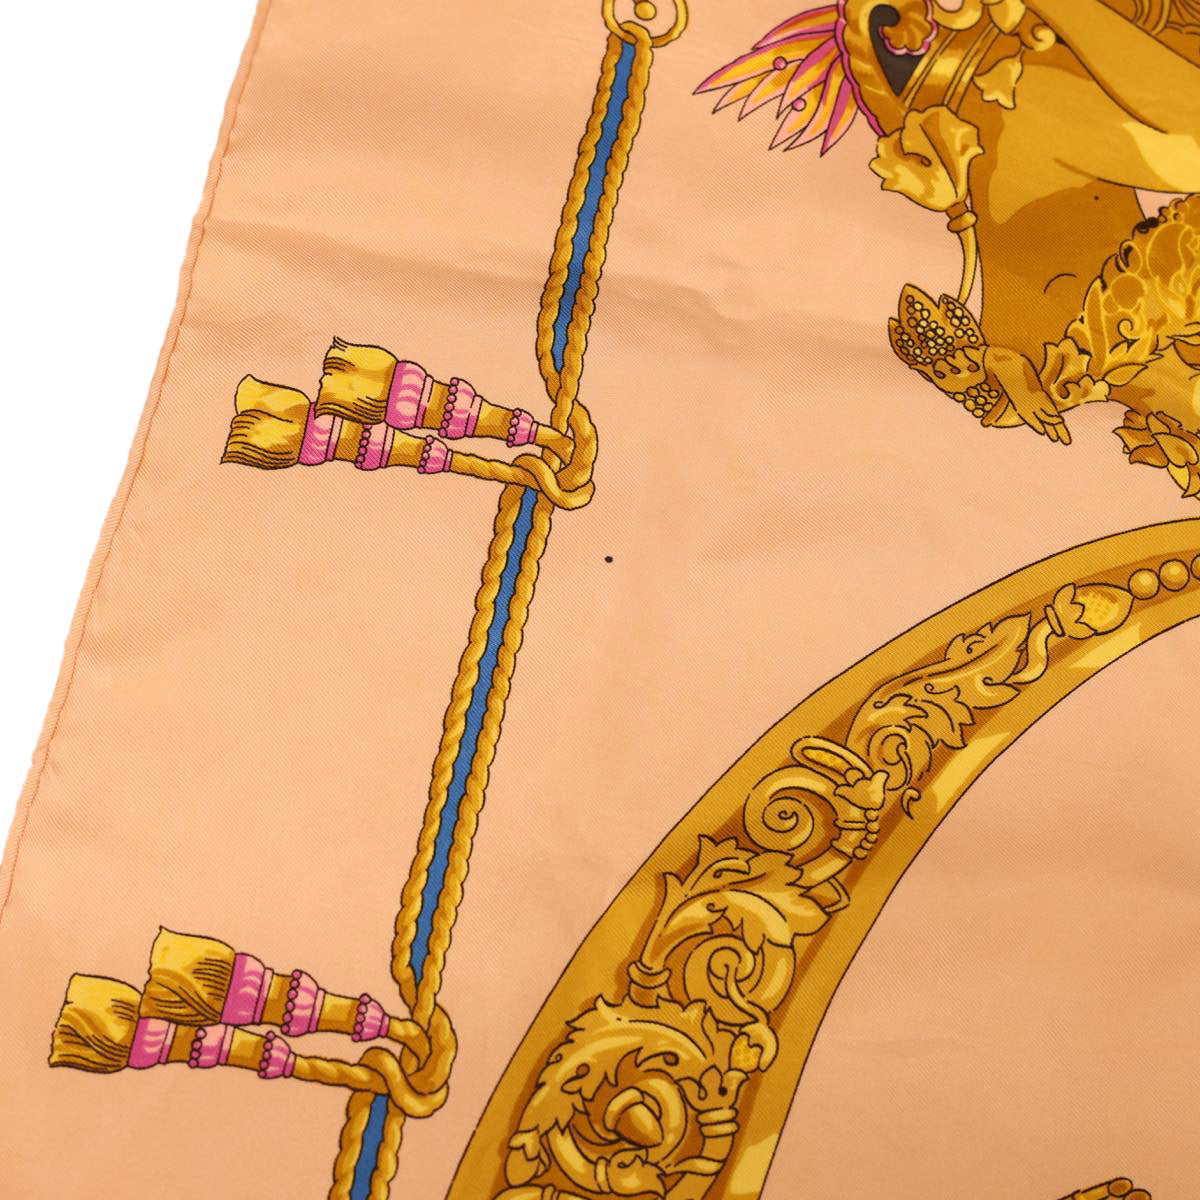 HERMES Carre 90 HOMMAGE A CHARLES GARNIER Scarf Silk Pink Yellow Auth am4250